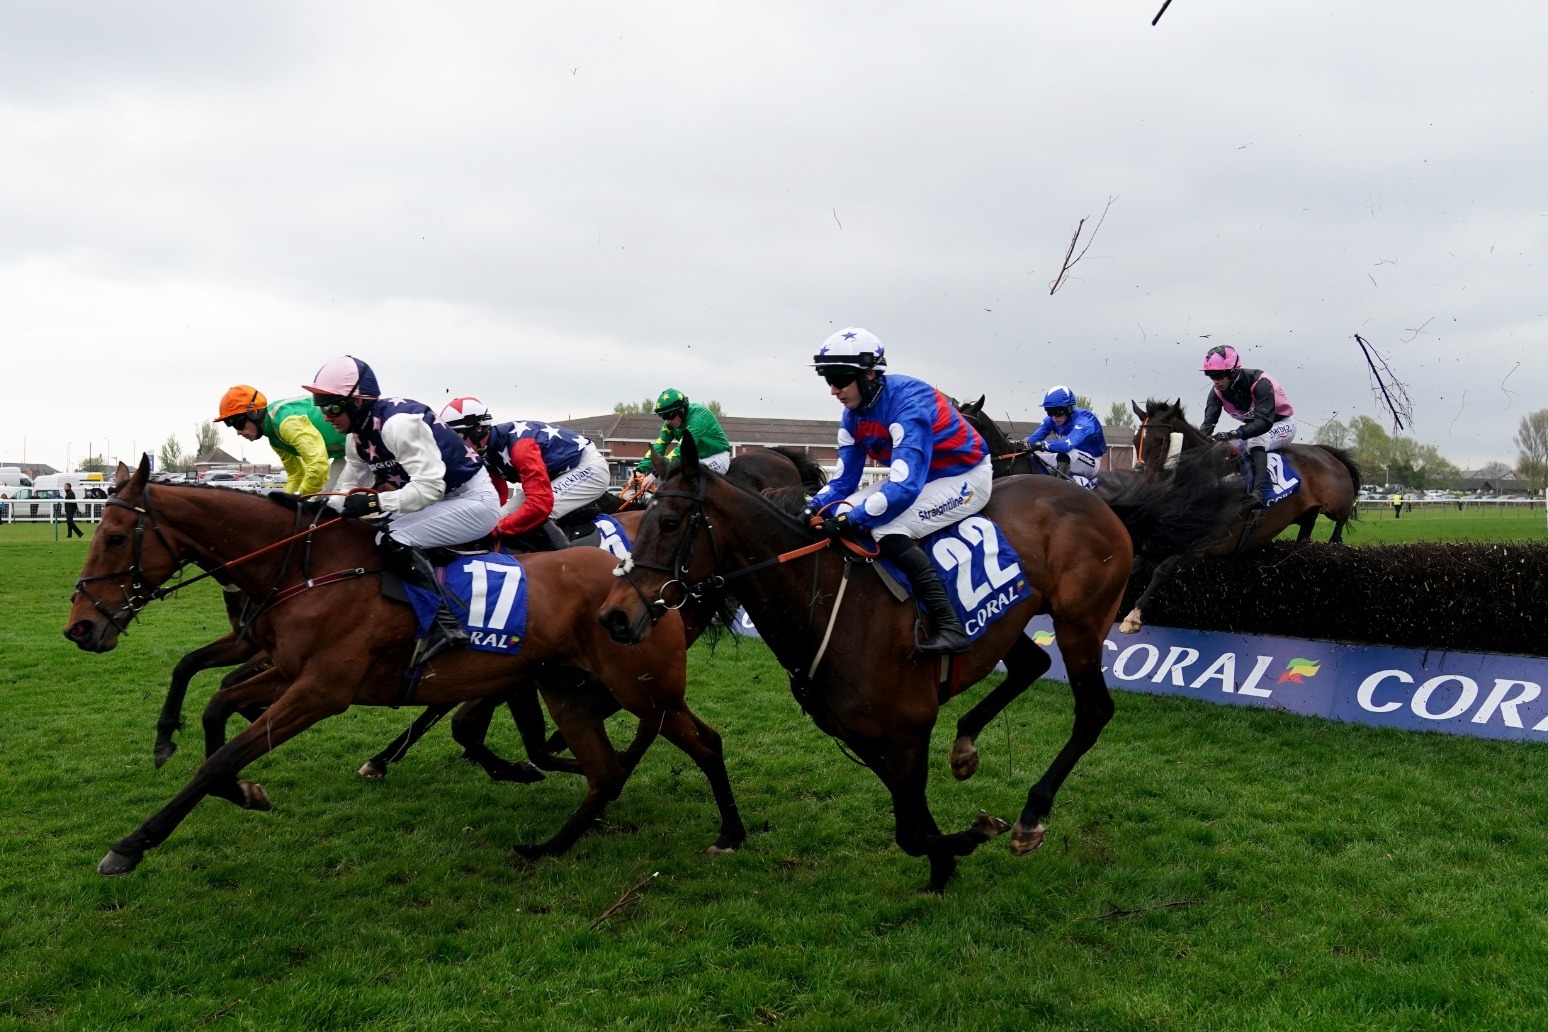 ITV’s Grand National coverage had 700 complaints over response to protests 